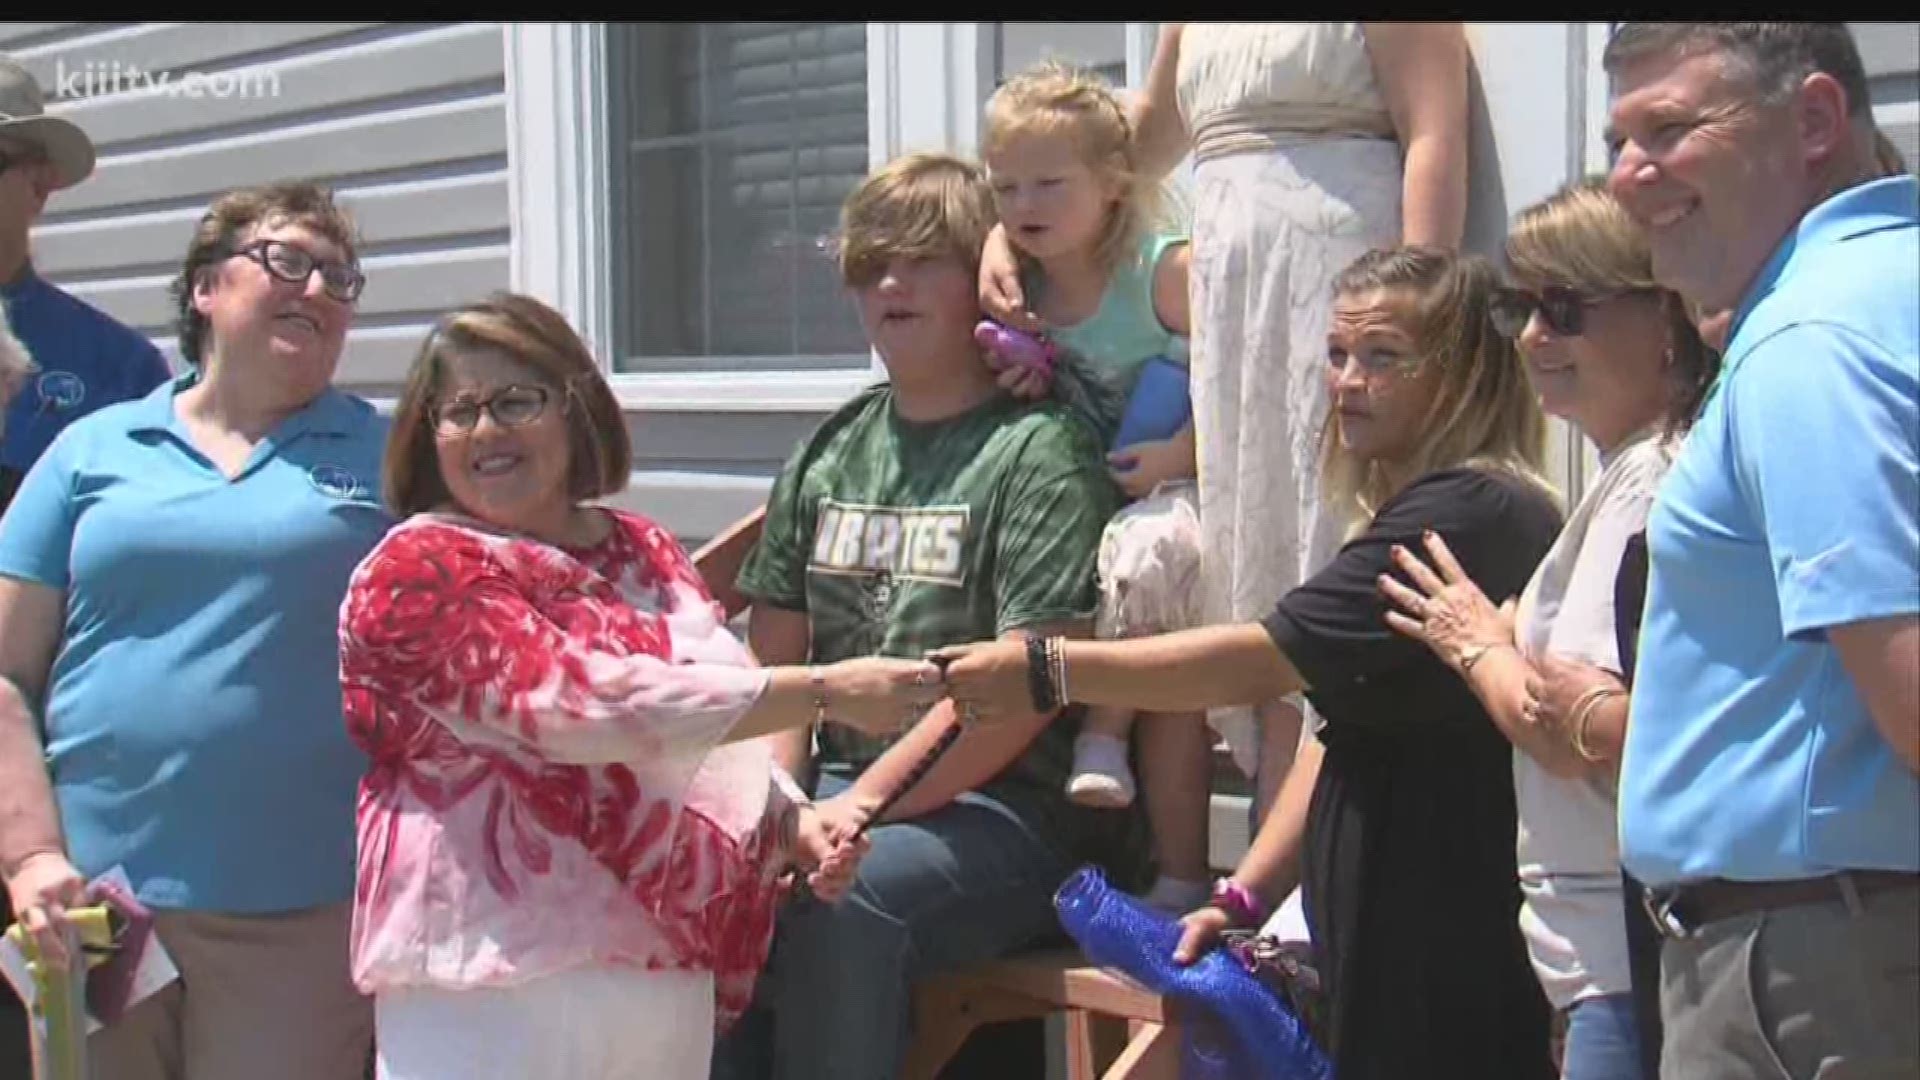 An Aransas Pass mother and her three children who lost their home and all their possessions in Harvey got a special present on the eve of the storm's anniversary, a new home.